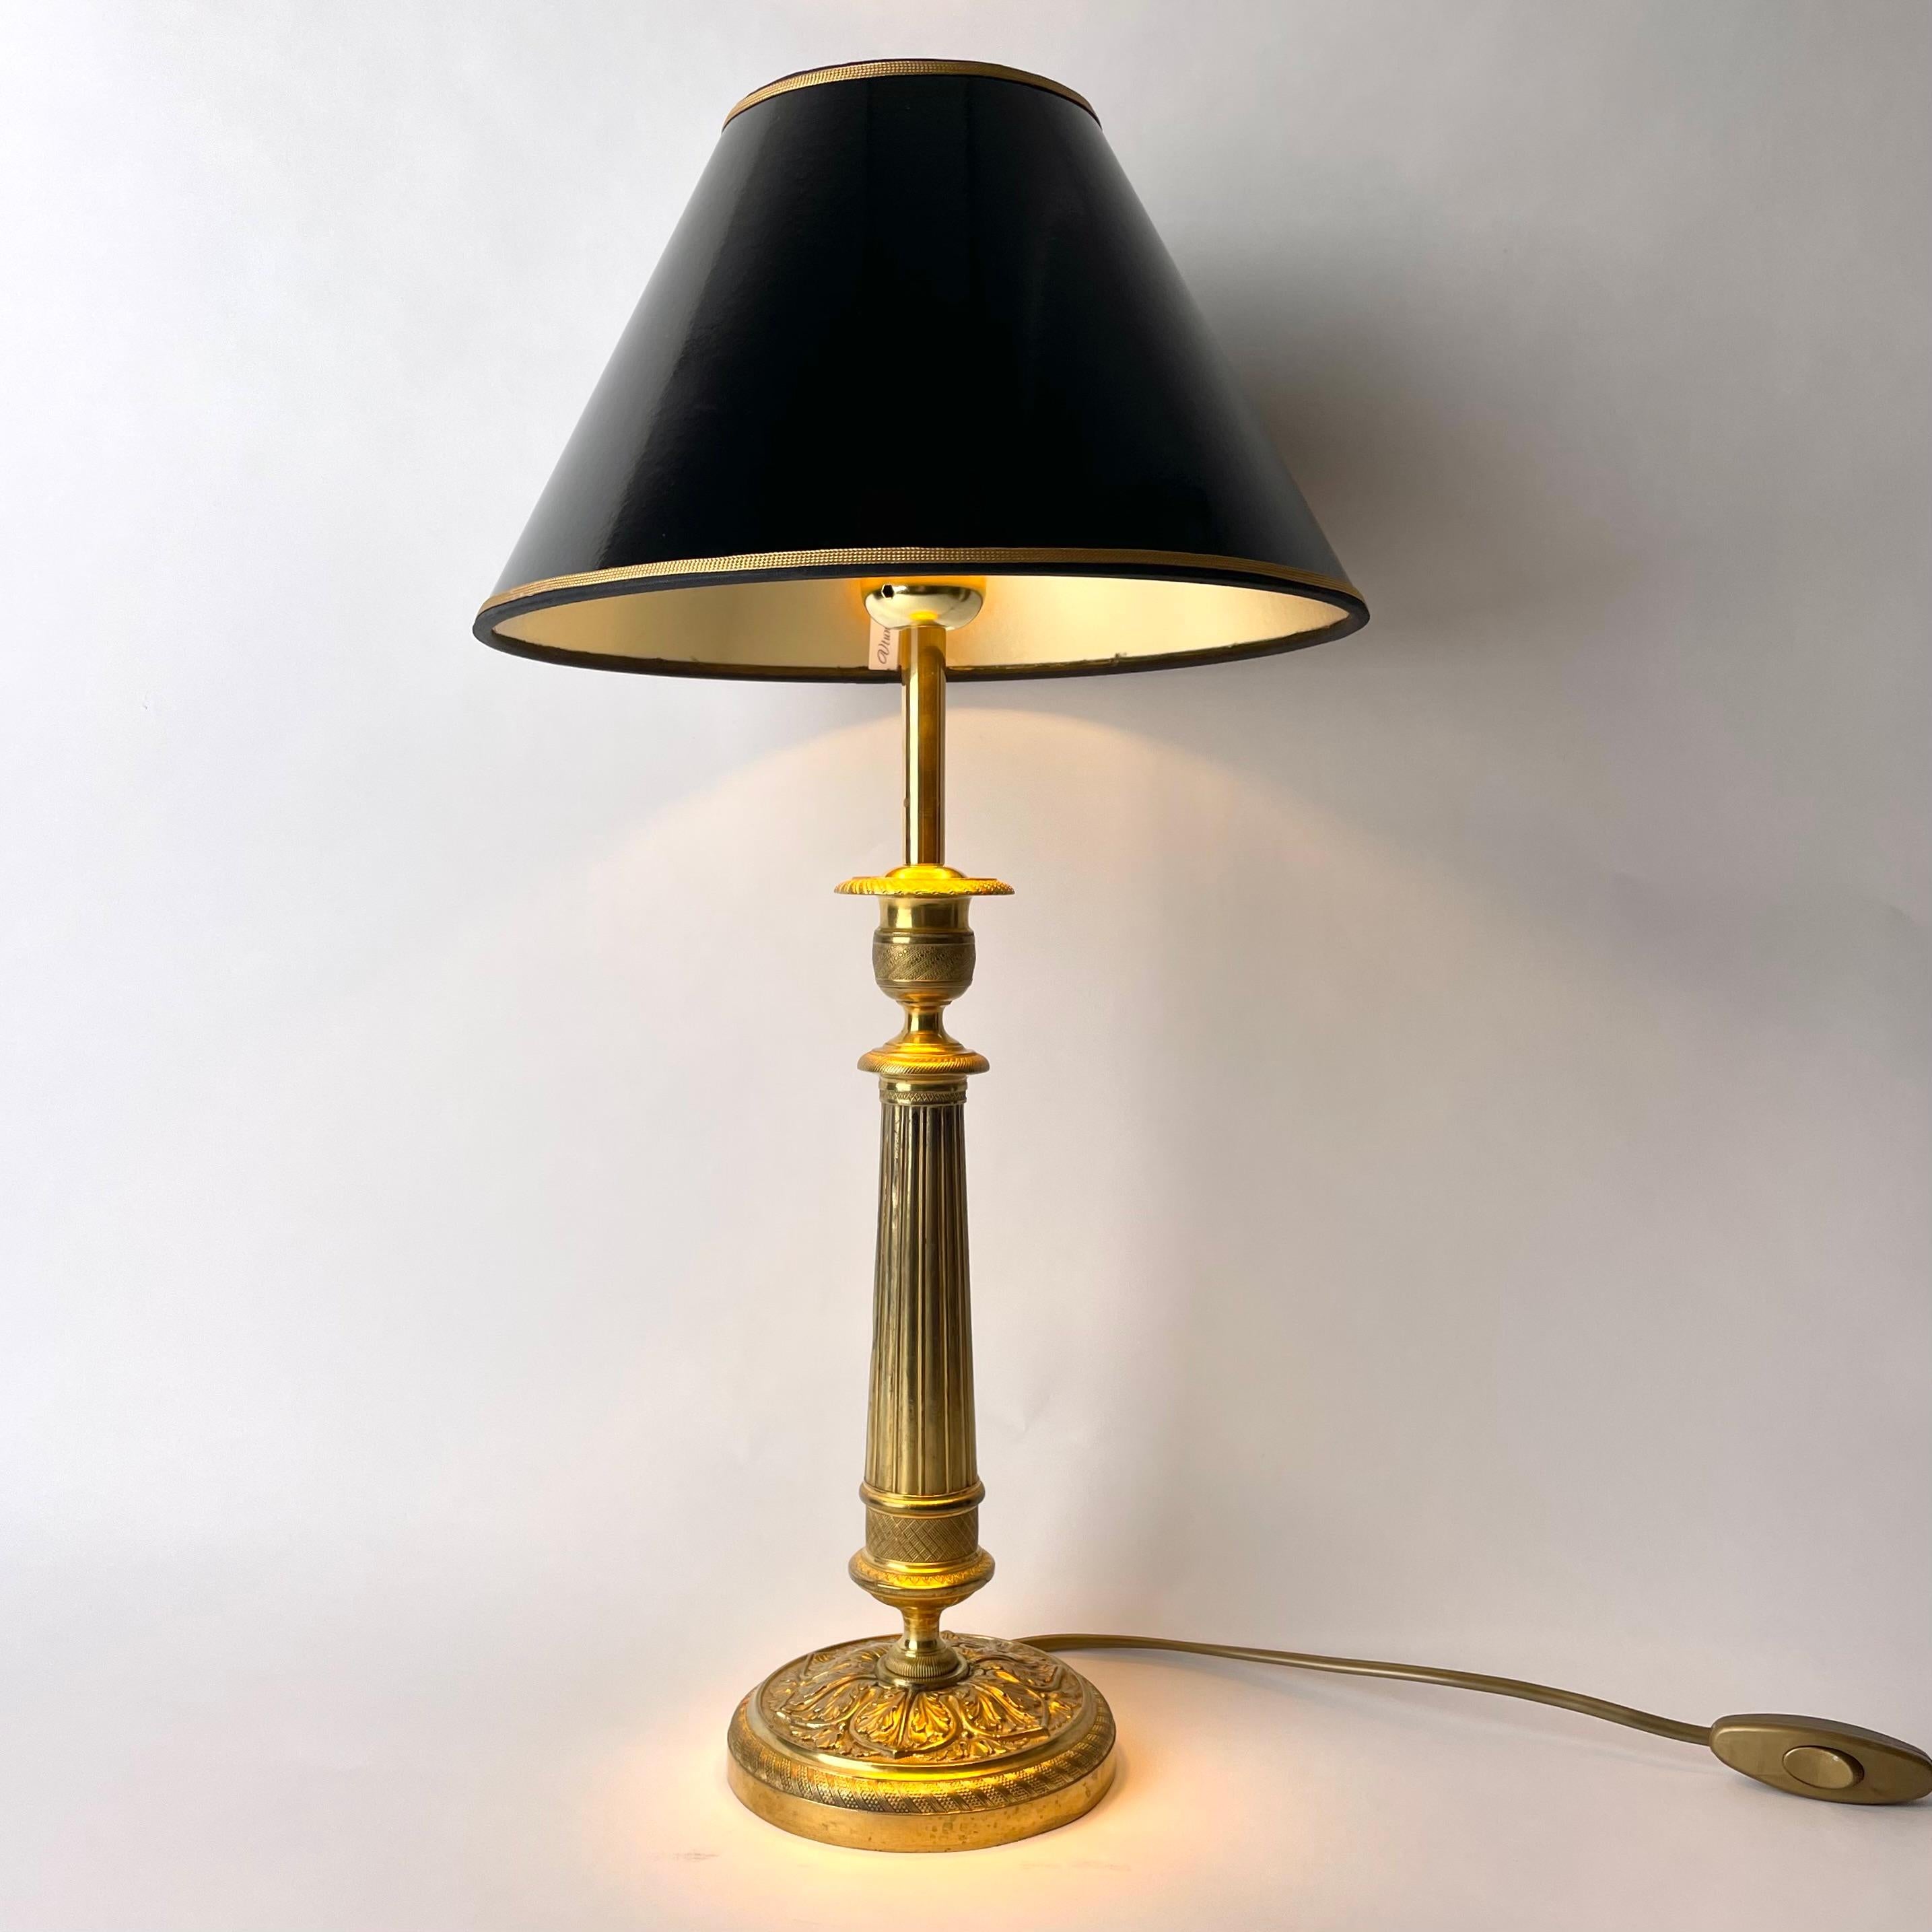 Elegant Table Lamp in bronze. Originally an Empire candlestick from France made during the 1820s. The middle part in the form of a column. Richly decorated with leaf and period Empire decorations.

New lampshade in black lacquer with a gilded inside